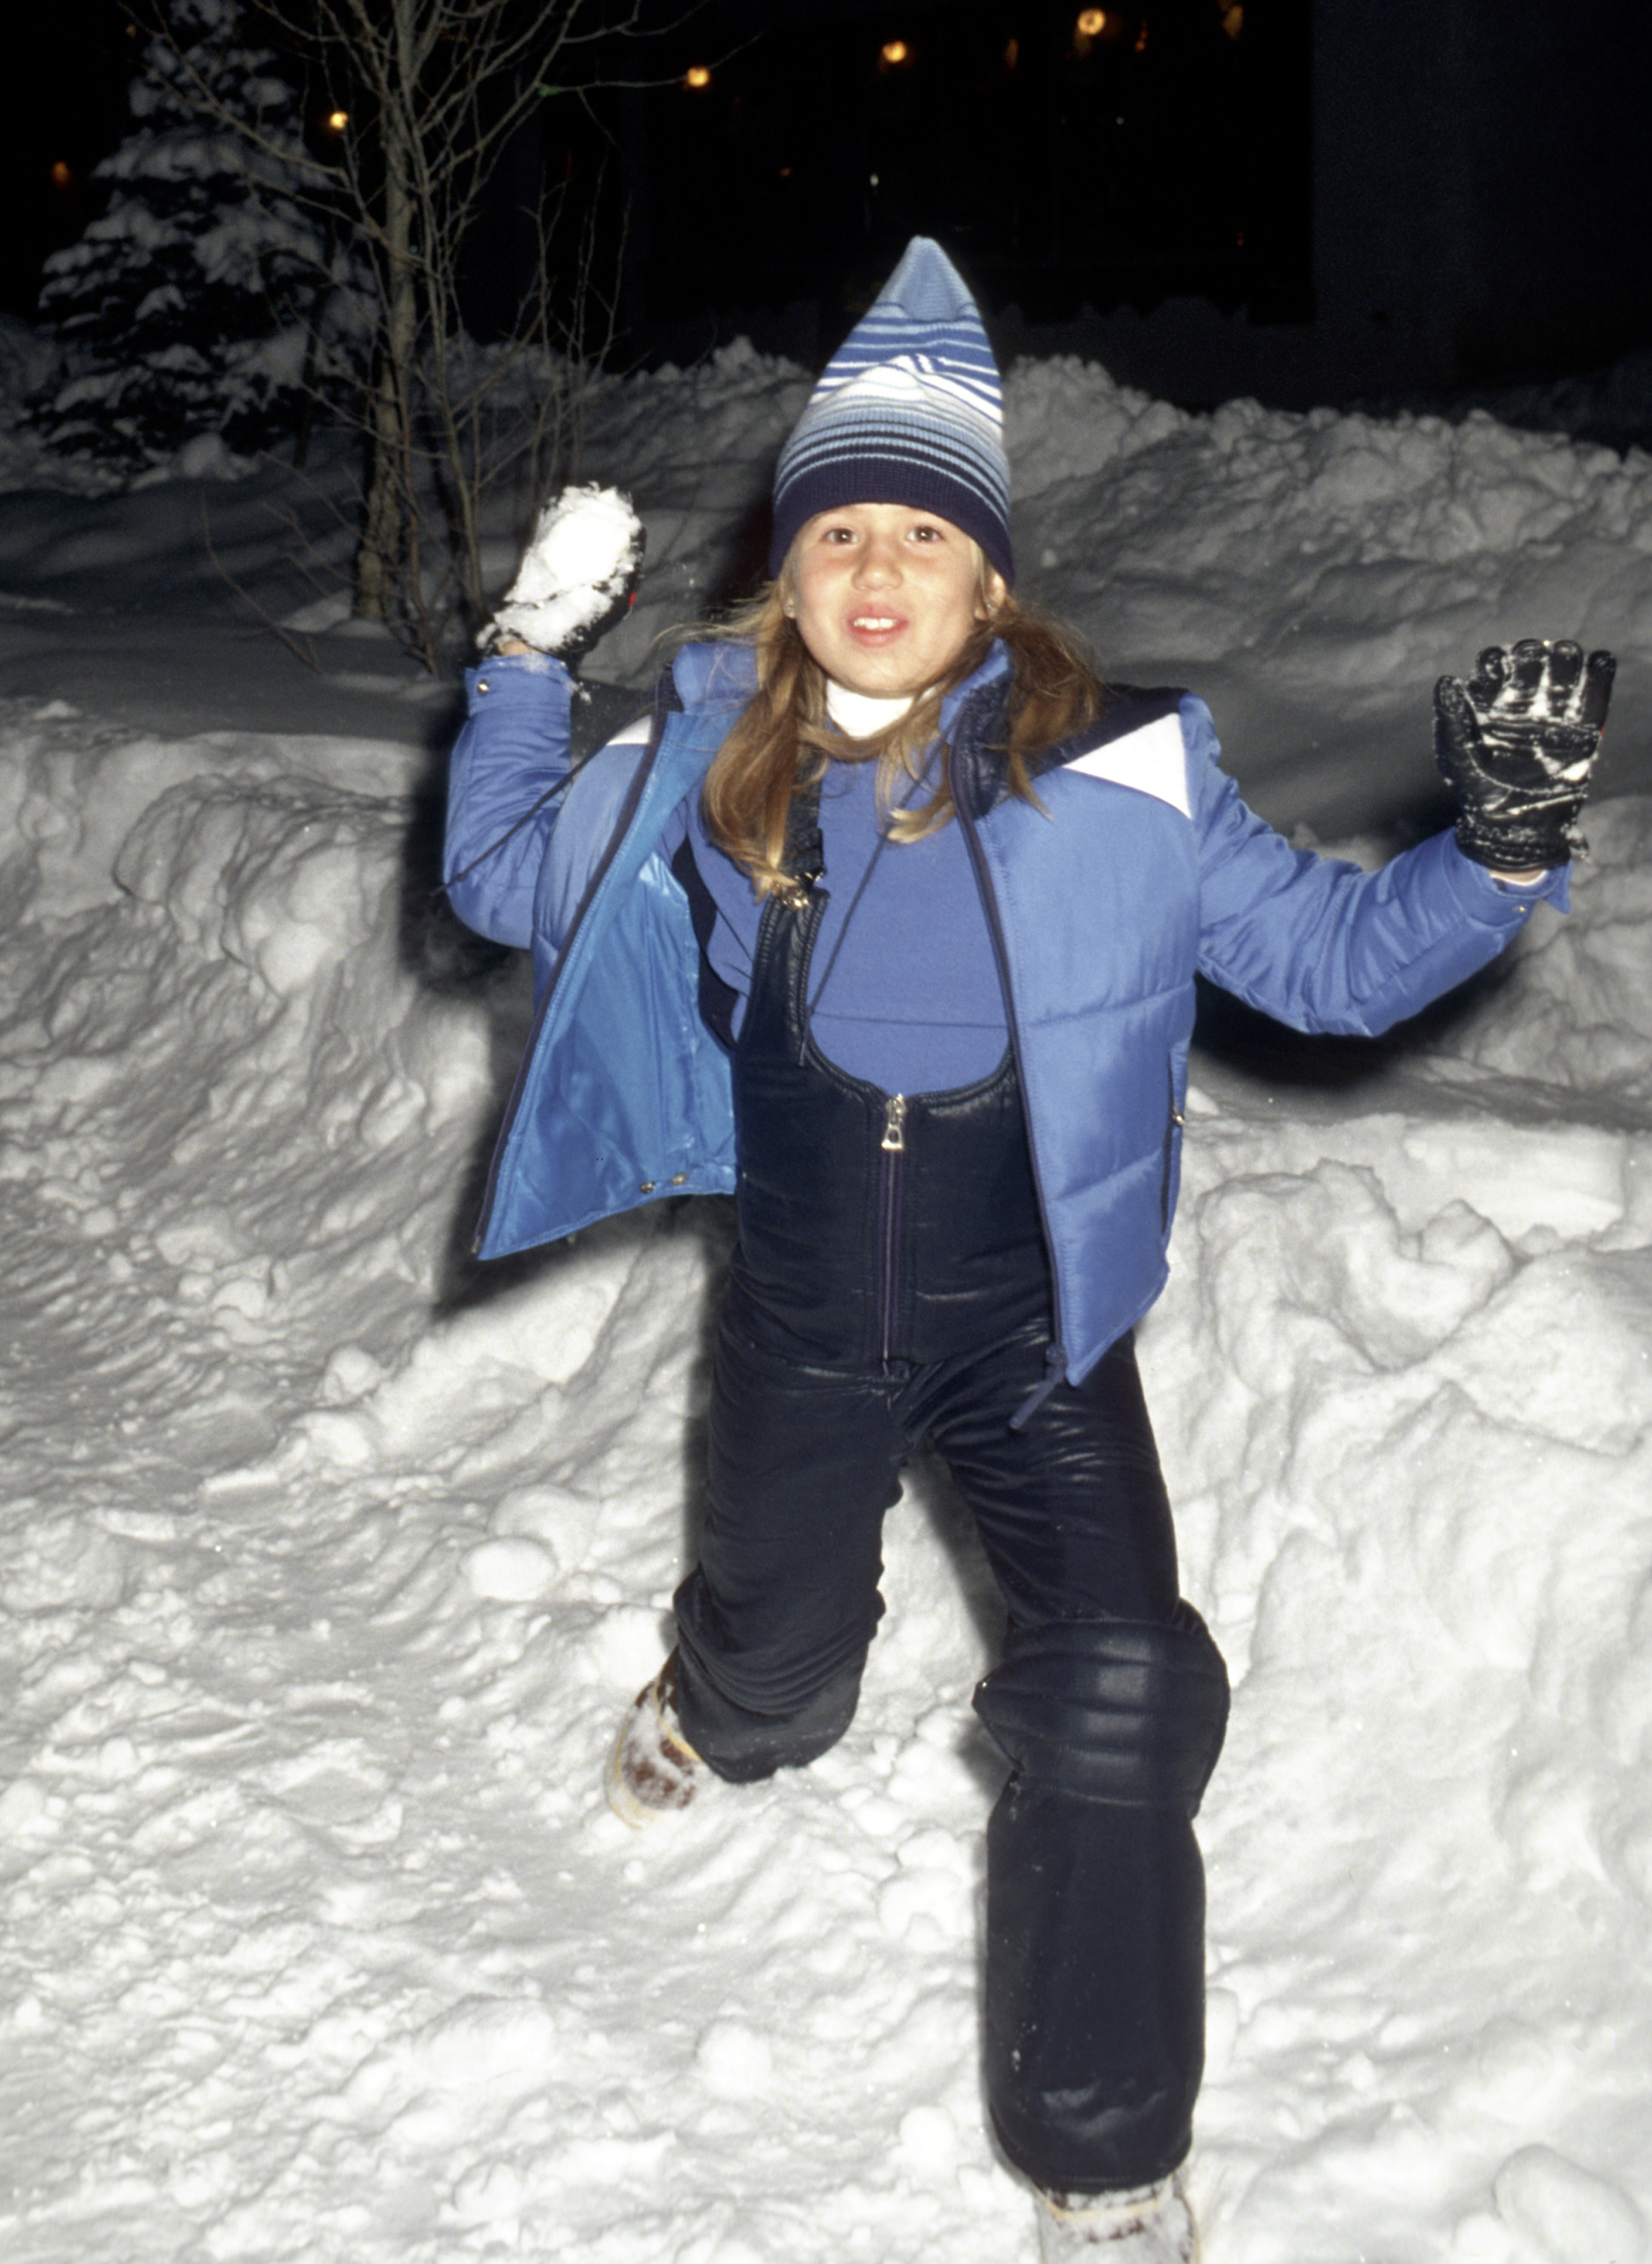 Chastity Bono in Aspen, Colorado, on December 12, 1977. | Source: Getty Images